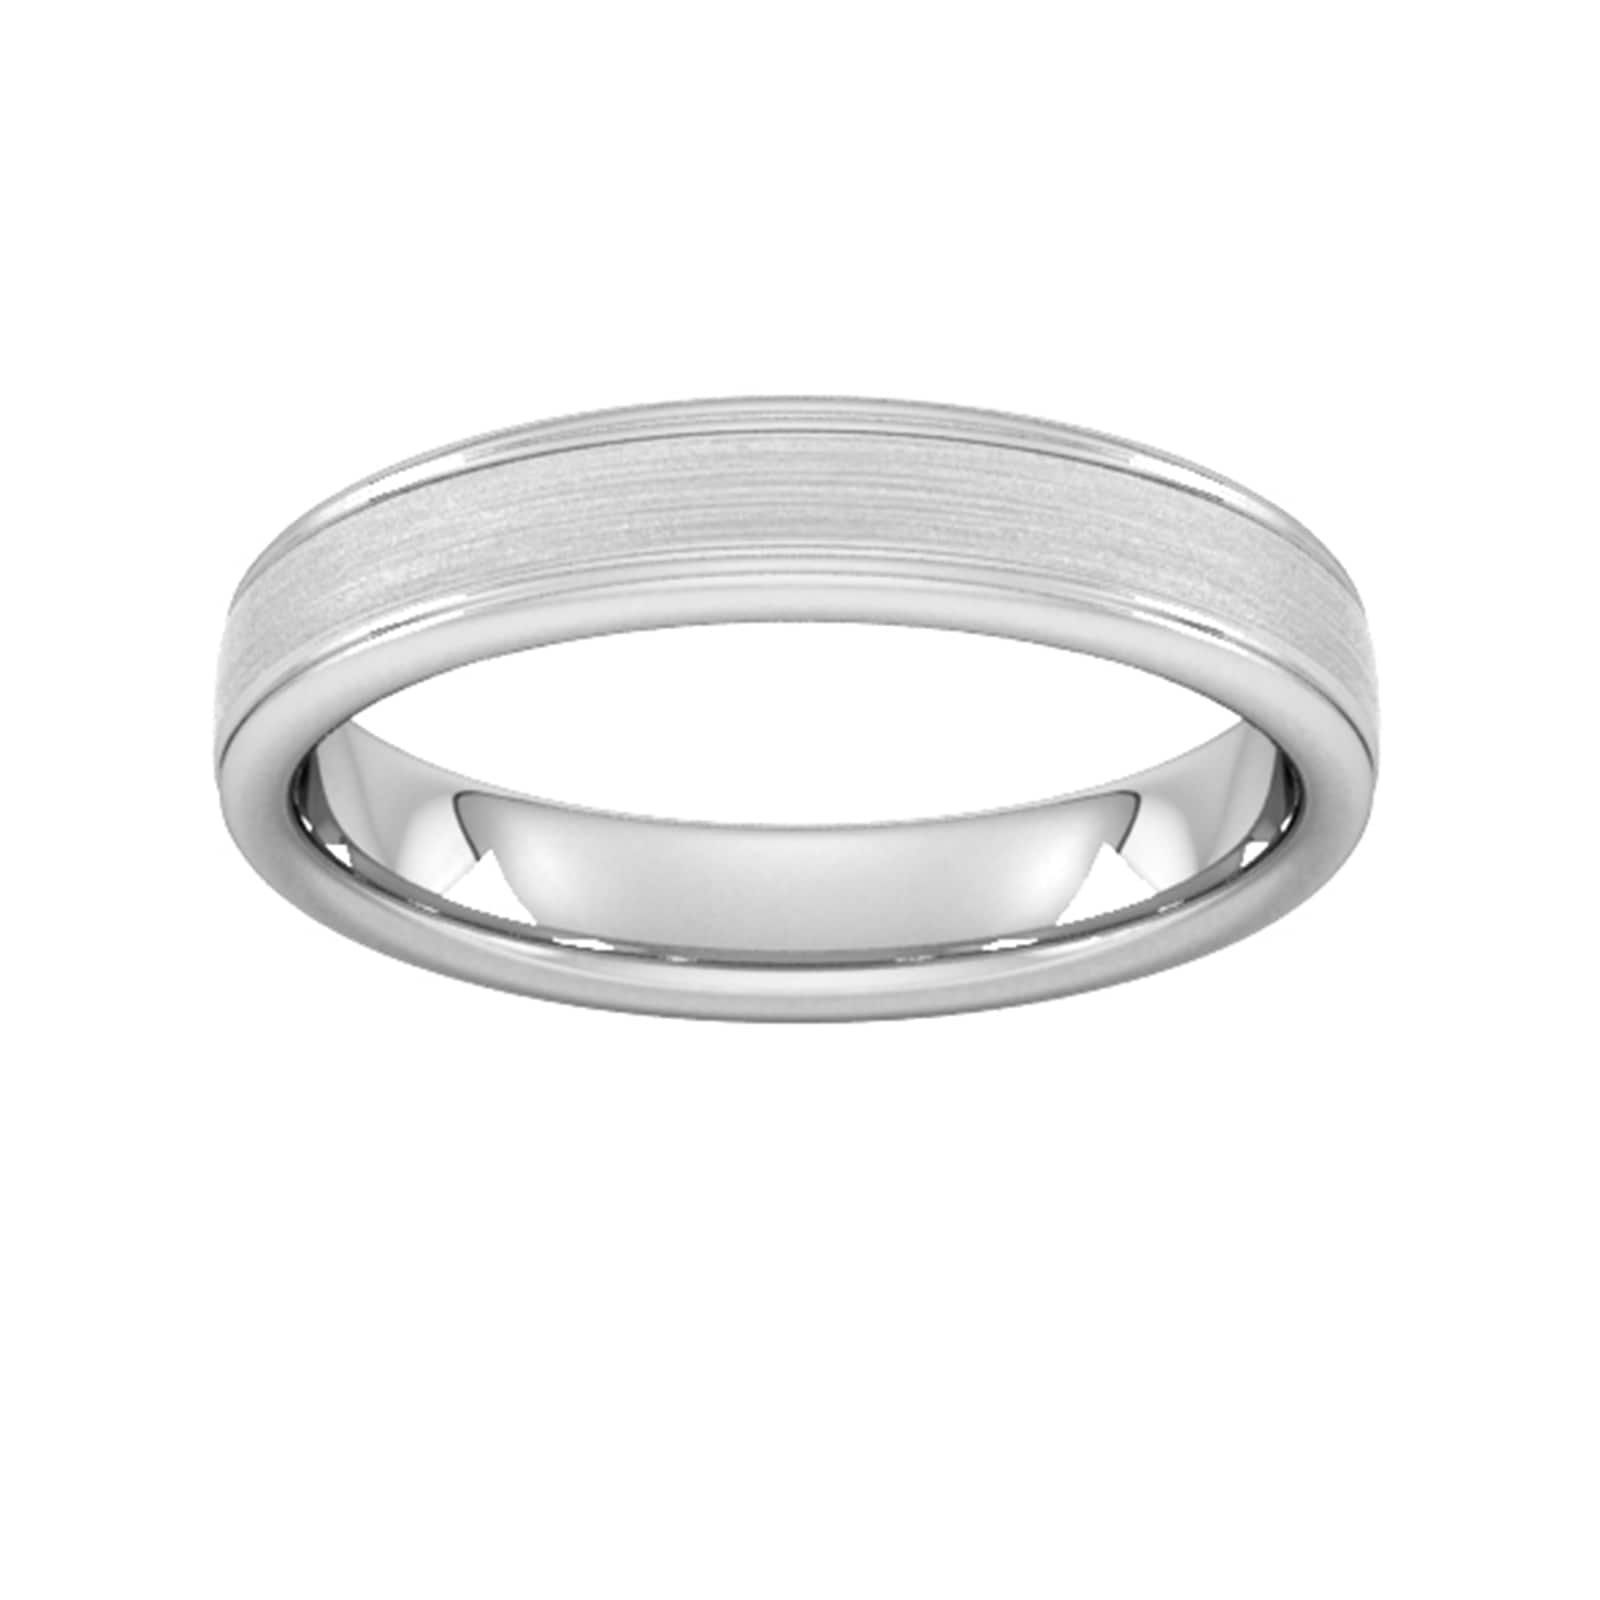 4mm D Shape Heavy Matt Centre With Grooves Wedding Ring In 950 Palladium - Ring Size Y